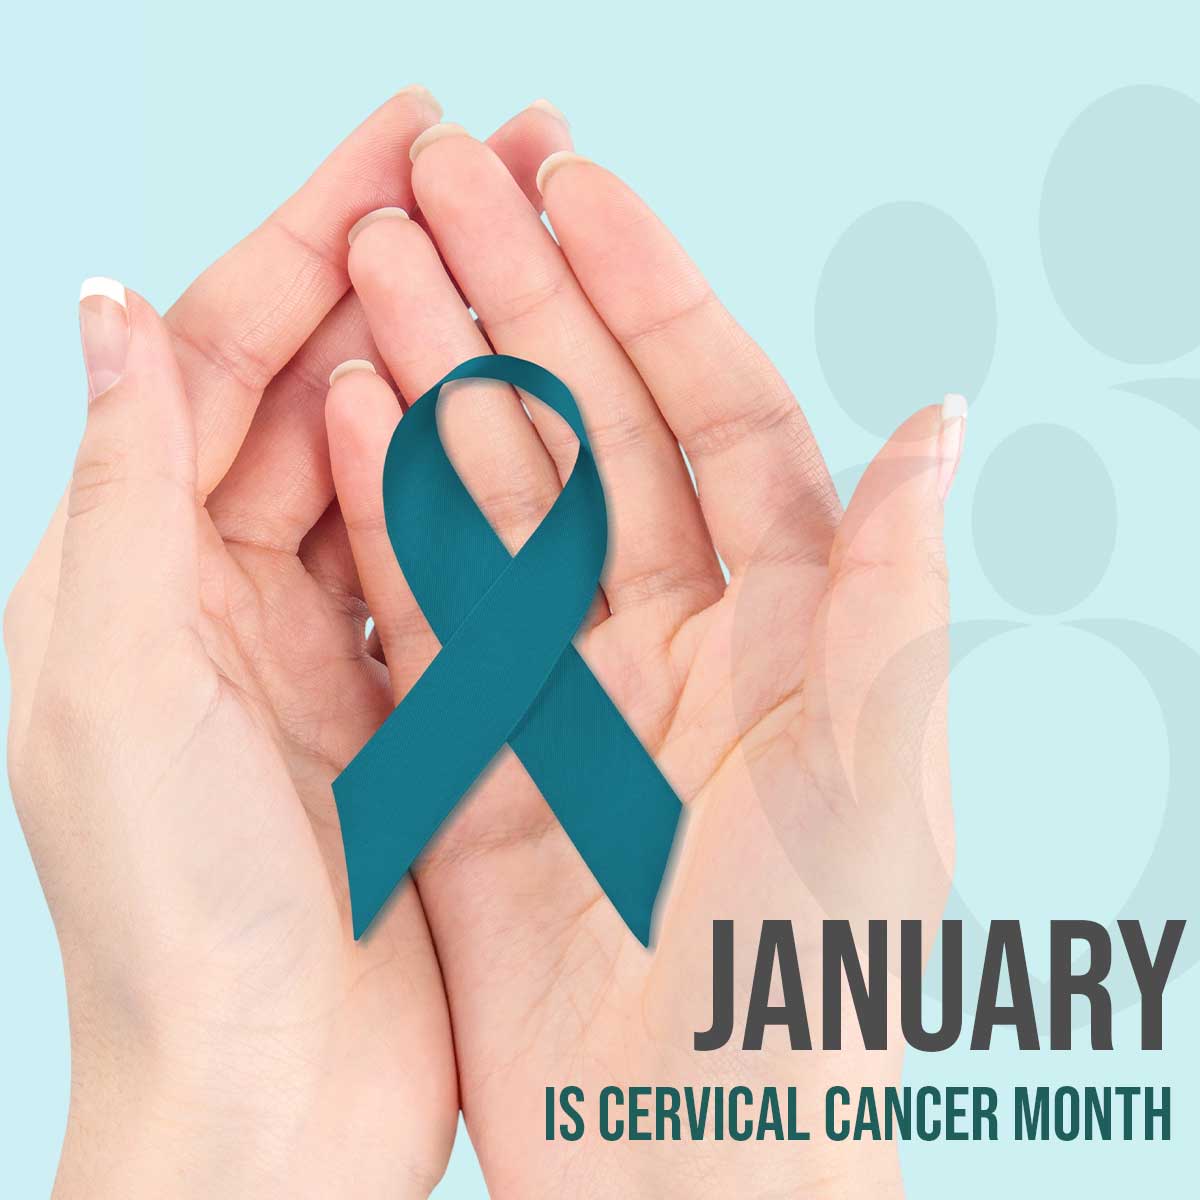 Cervical Cancer Awareness Month | Promise Community Health Center, medical clinic near me, medical care near me, prenatal care near me, behavioral healthcare near me, therapist near me, doctor near me, nurse near me, nurse health coaching near me, nurse practitioner near me, translator near me, dentist near me, optometrist near me, lab services near me, immunizations near me, outreach services near me, midwives near me, home birth near me, health care near me